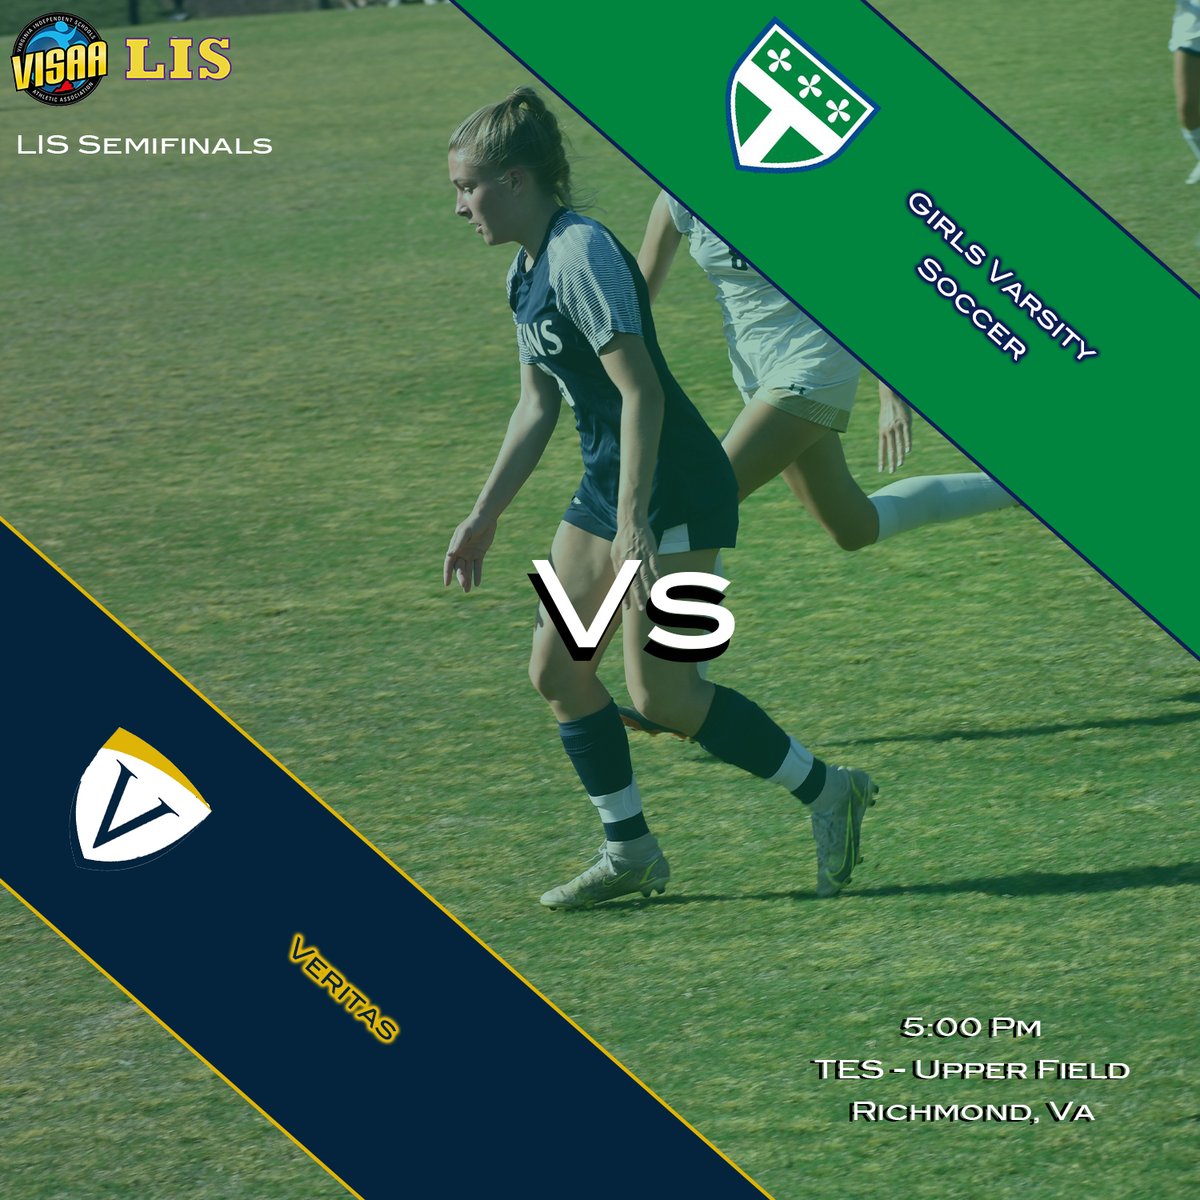 #5 (#2 LIS) Girls soccer is at home for a massive semifinal matchup with #8 (DII) (#3 LIS) Veritas on the upper field. Come out and cheer on the team as they look to make it to the championship game Broadcast and follow @TESPNathletics youtube.com/@TESPNathletic… Let's Go Titans!